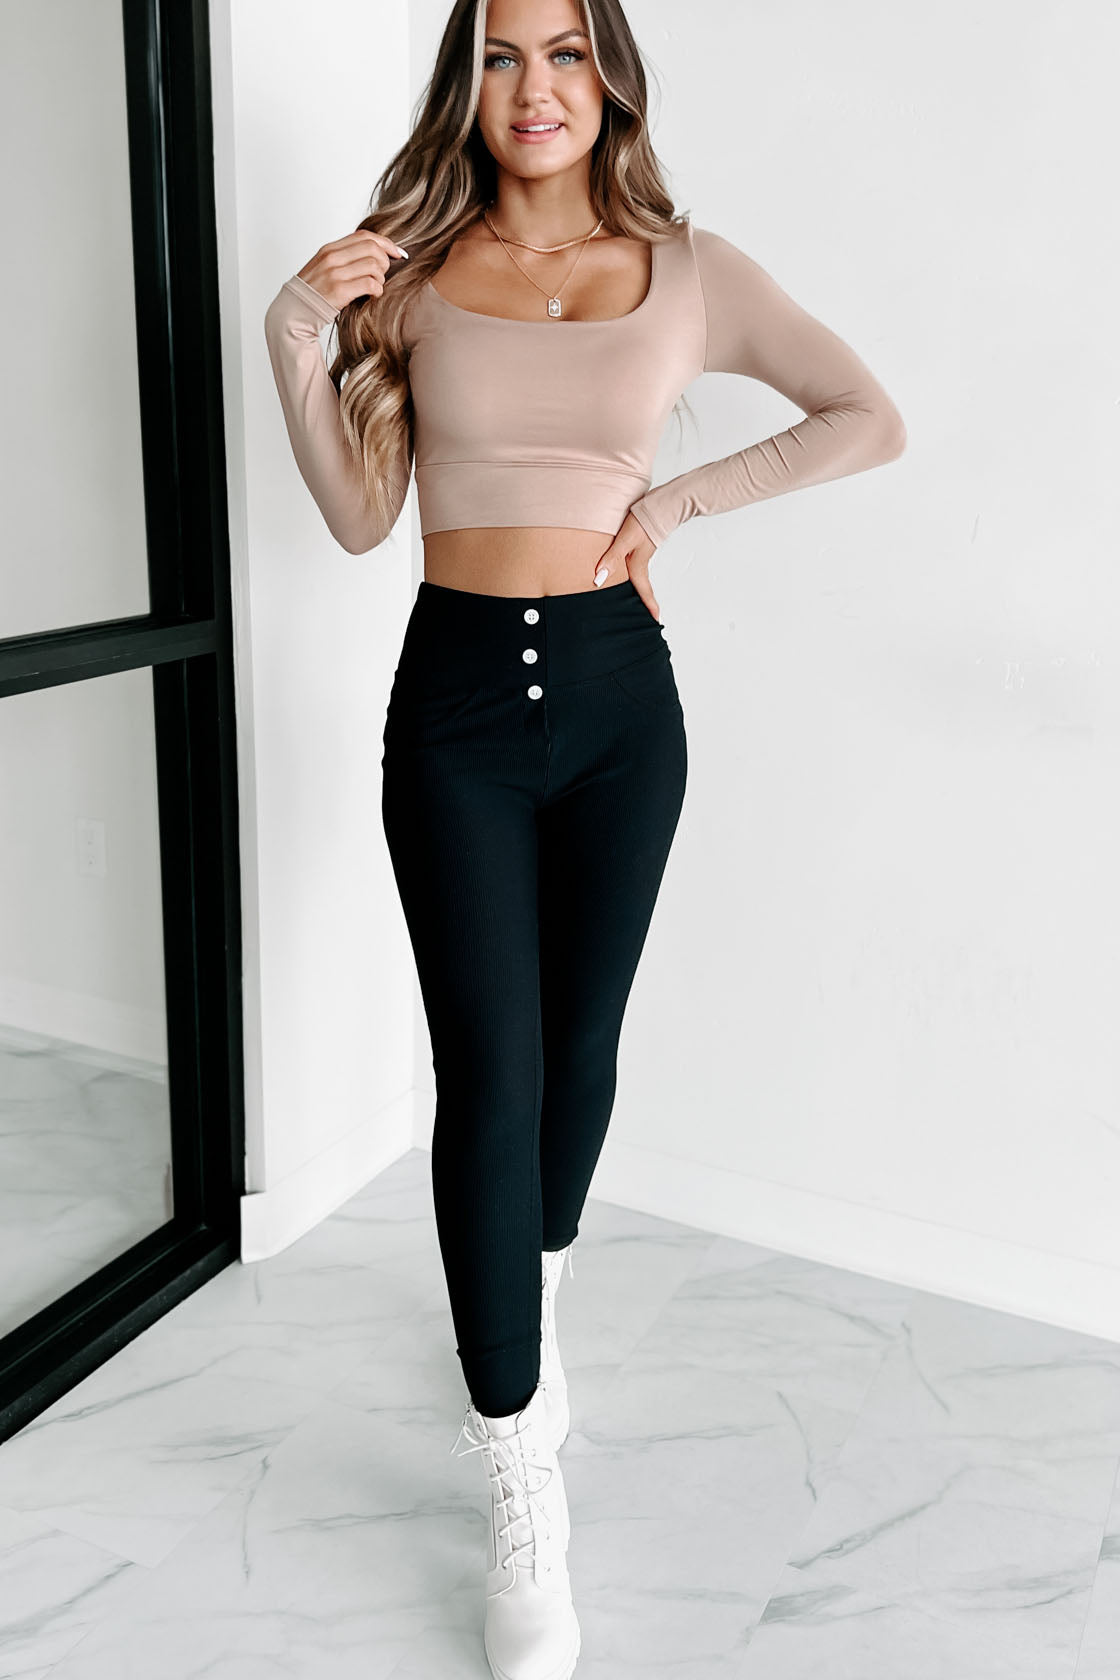 Glad You Stayed Square Neck Long Sleeve Crop Top (Tan) - NanaMacs